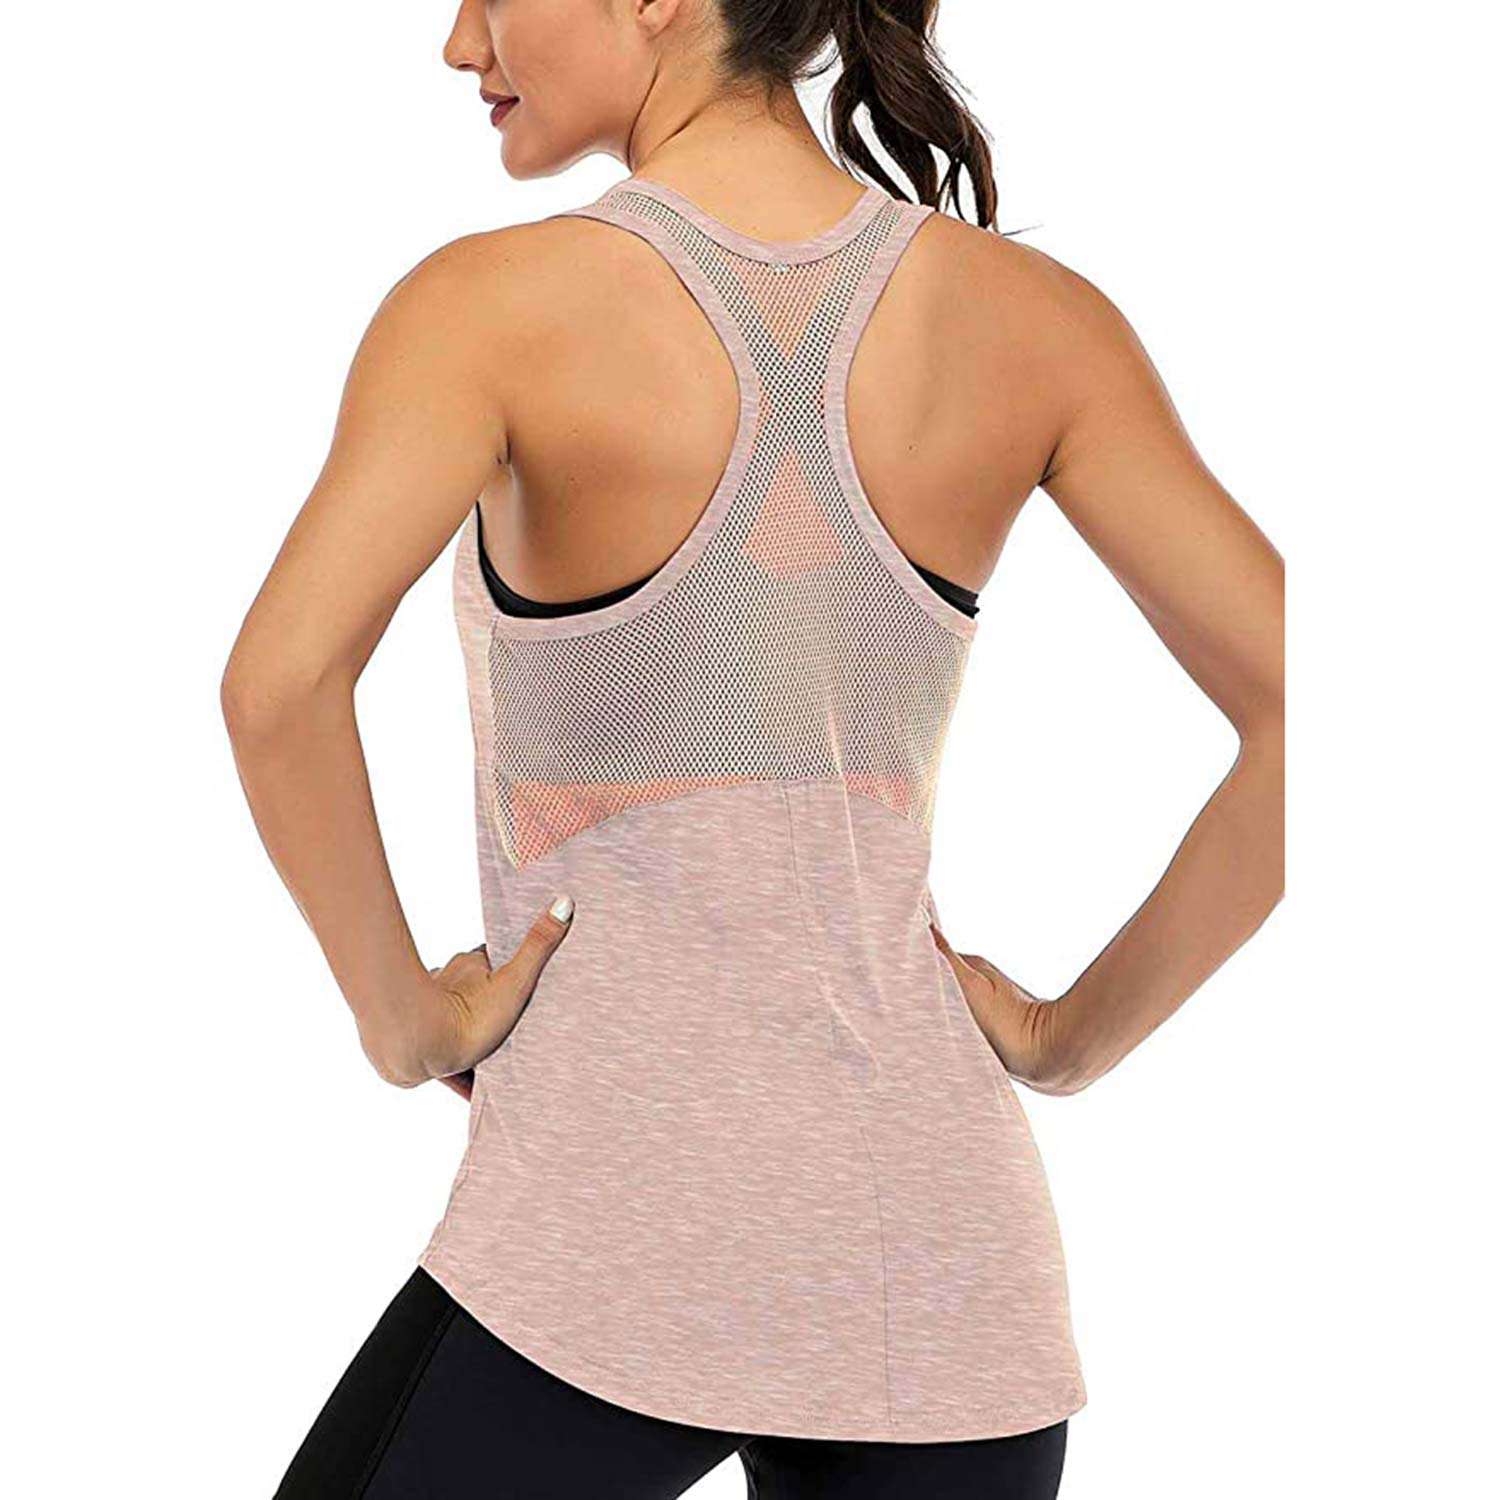 Workout Tops for Women Built in Bra Loose Tank Exercise Top Racerback Athletic Tank Yoga Shirt